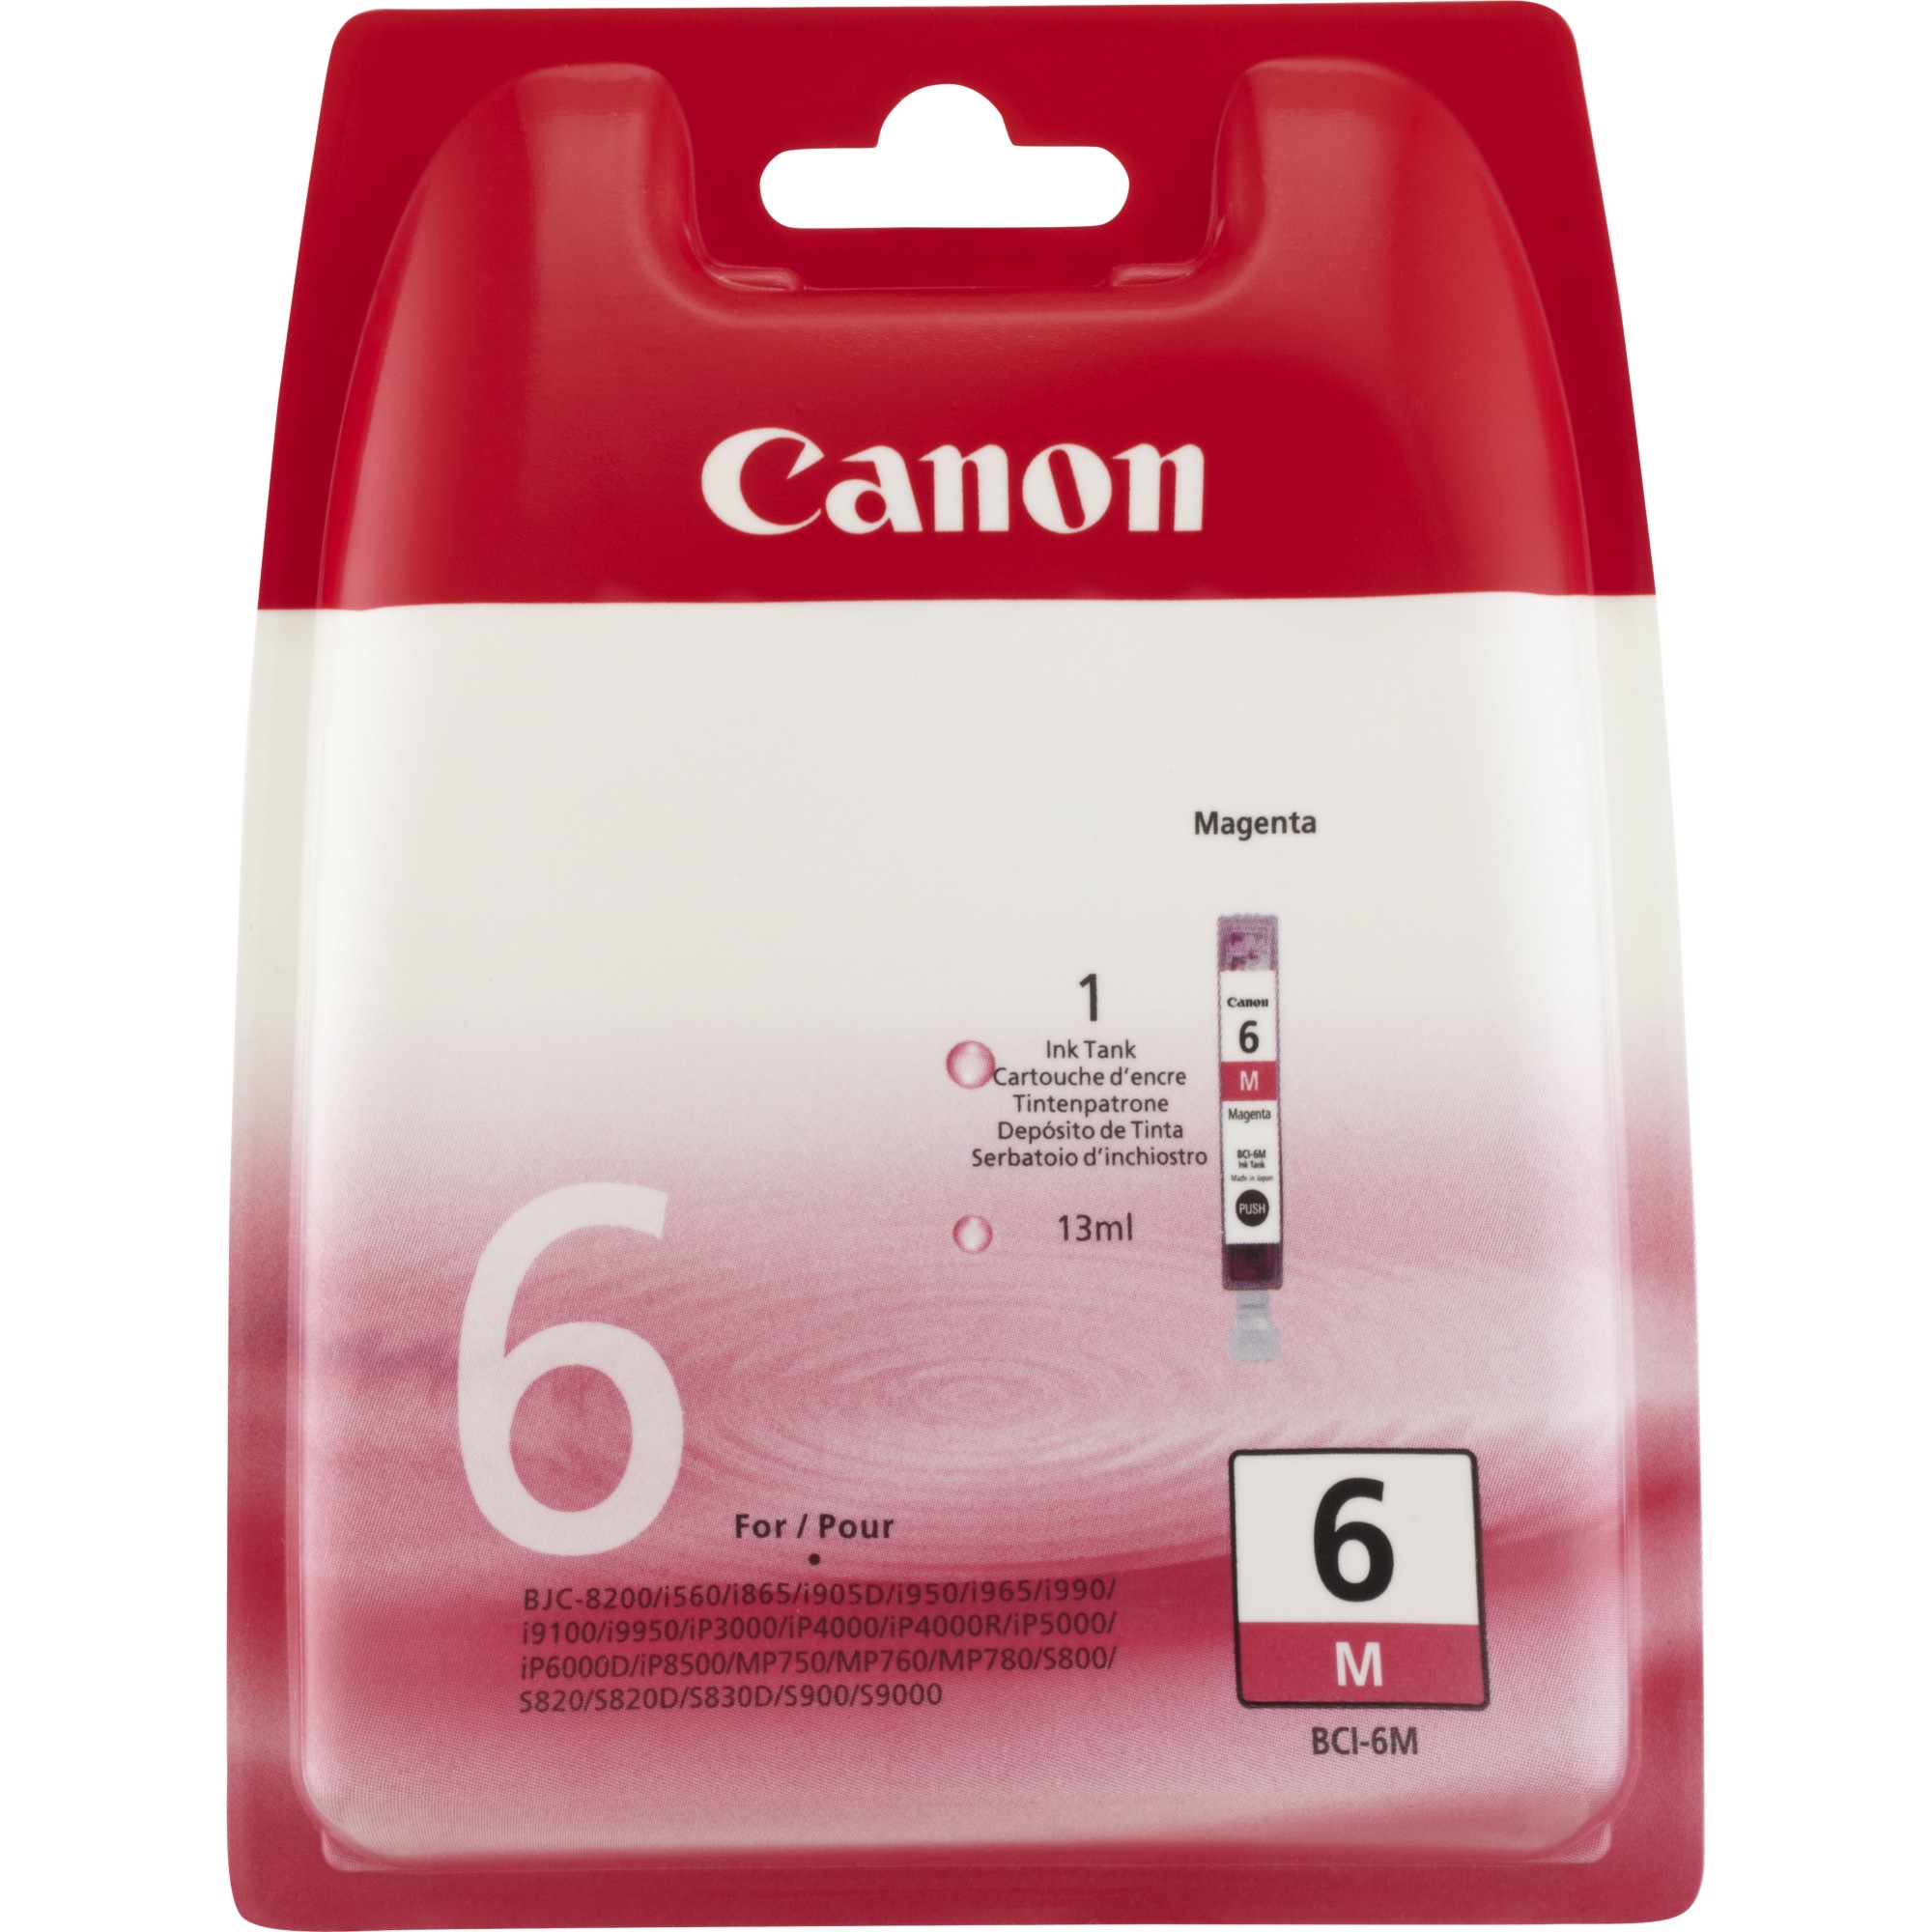 Canon 4707A002|BCI-6M Ink cartridge magenta, 280 pages ISO/IEC 24711 13ml for Canon BJC 8200/I 560/I 990/I 9900/S 800